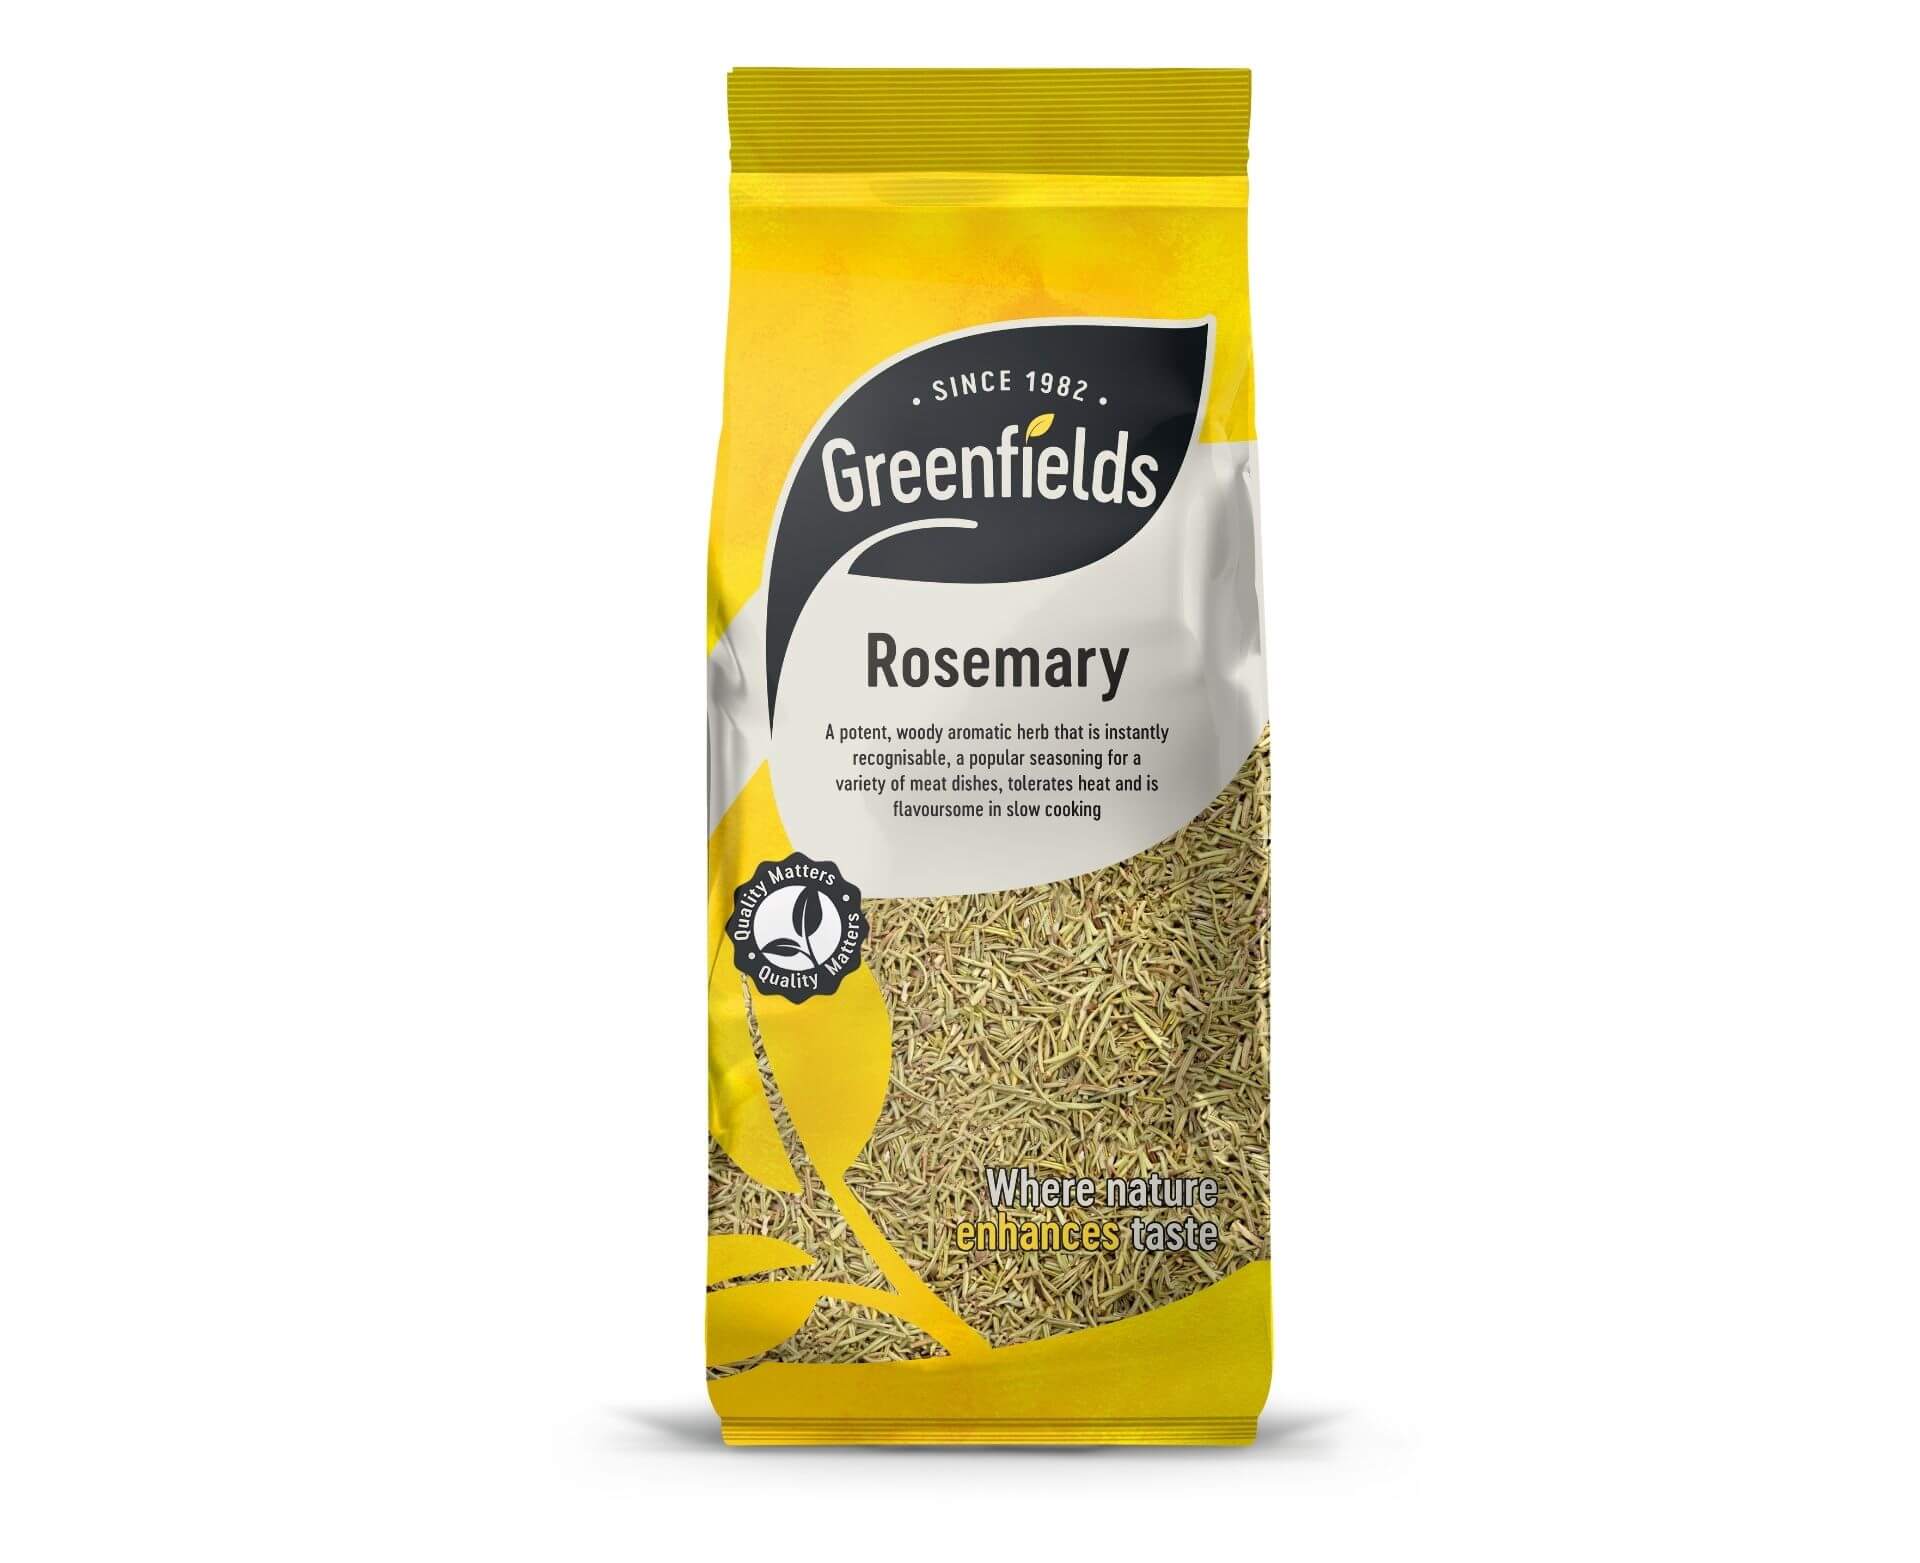 Greenfields Rosemary (50G) - Aytac Foods